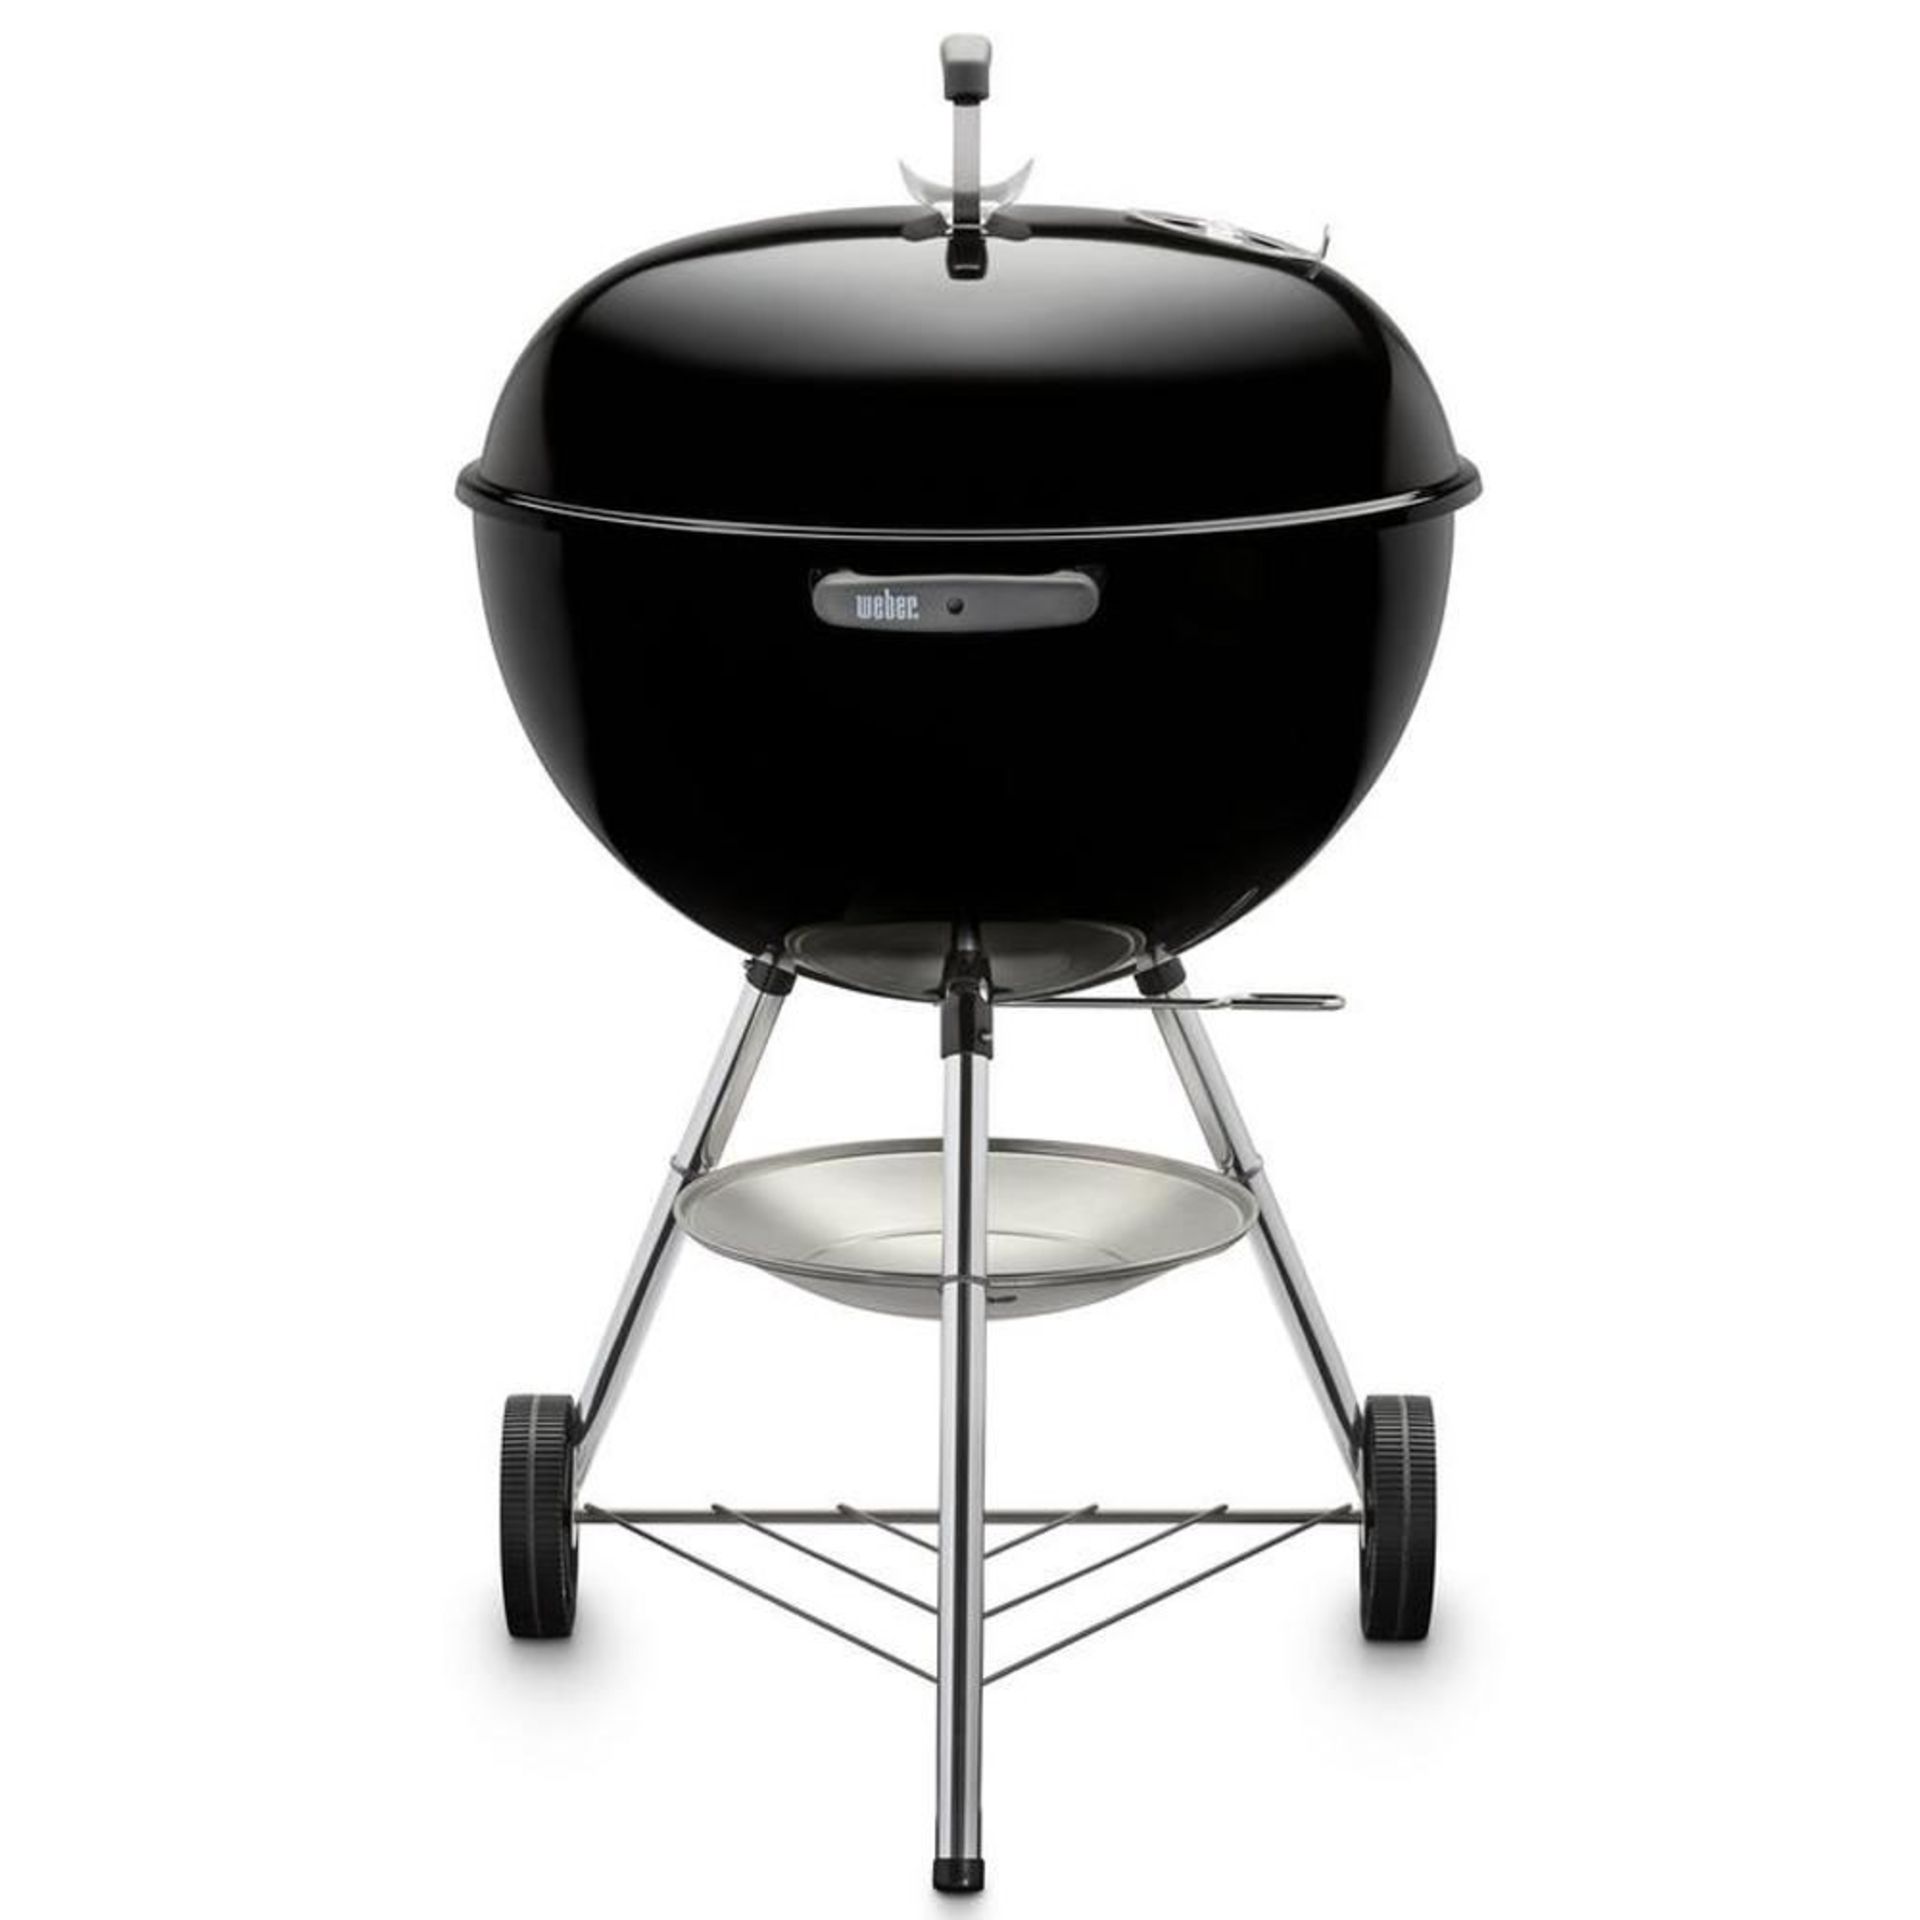 Weber 22 inch Original Kettle Charcoal Grill in Black